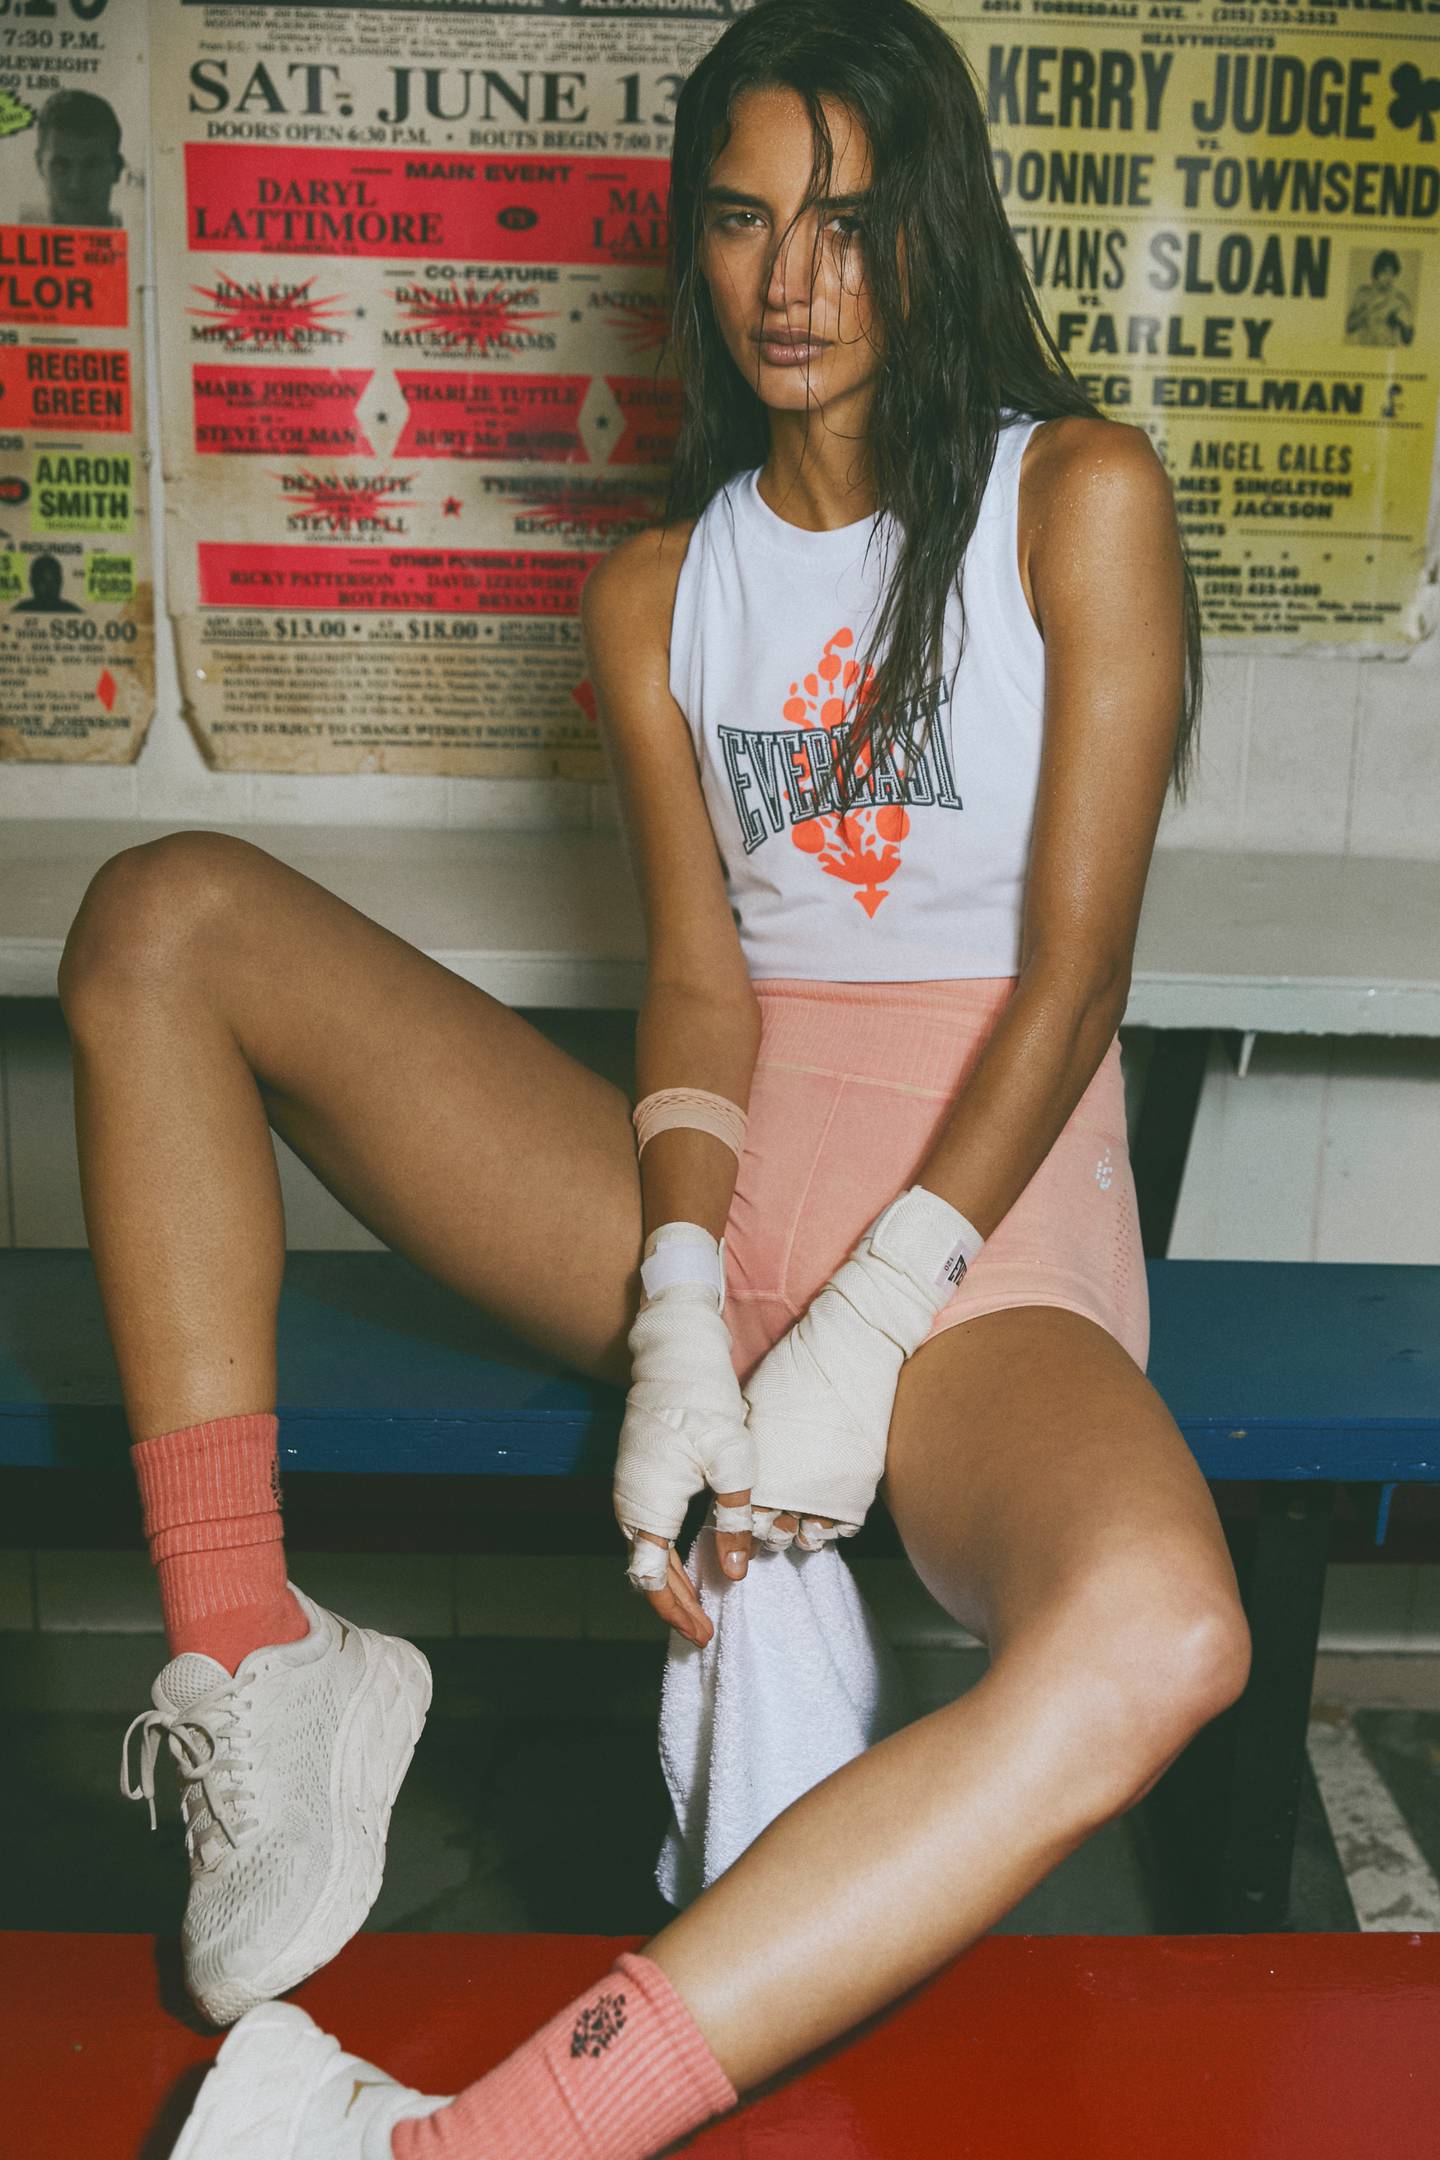 Free People's boxing collection with Everlast.